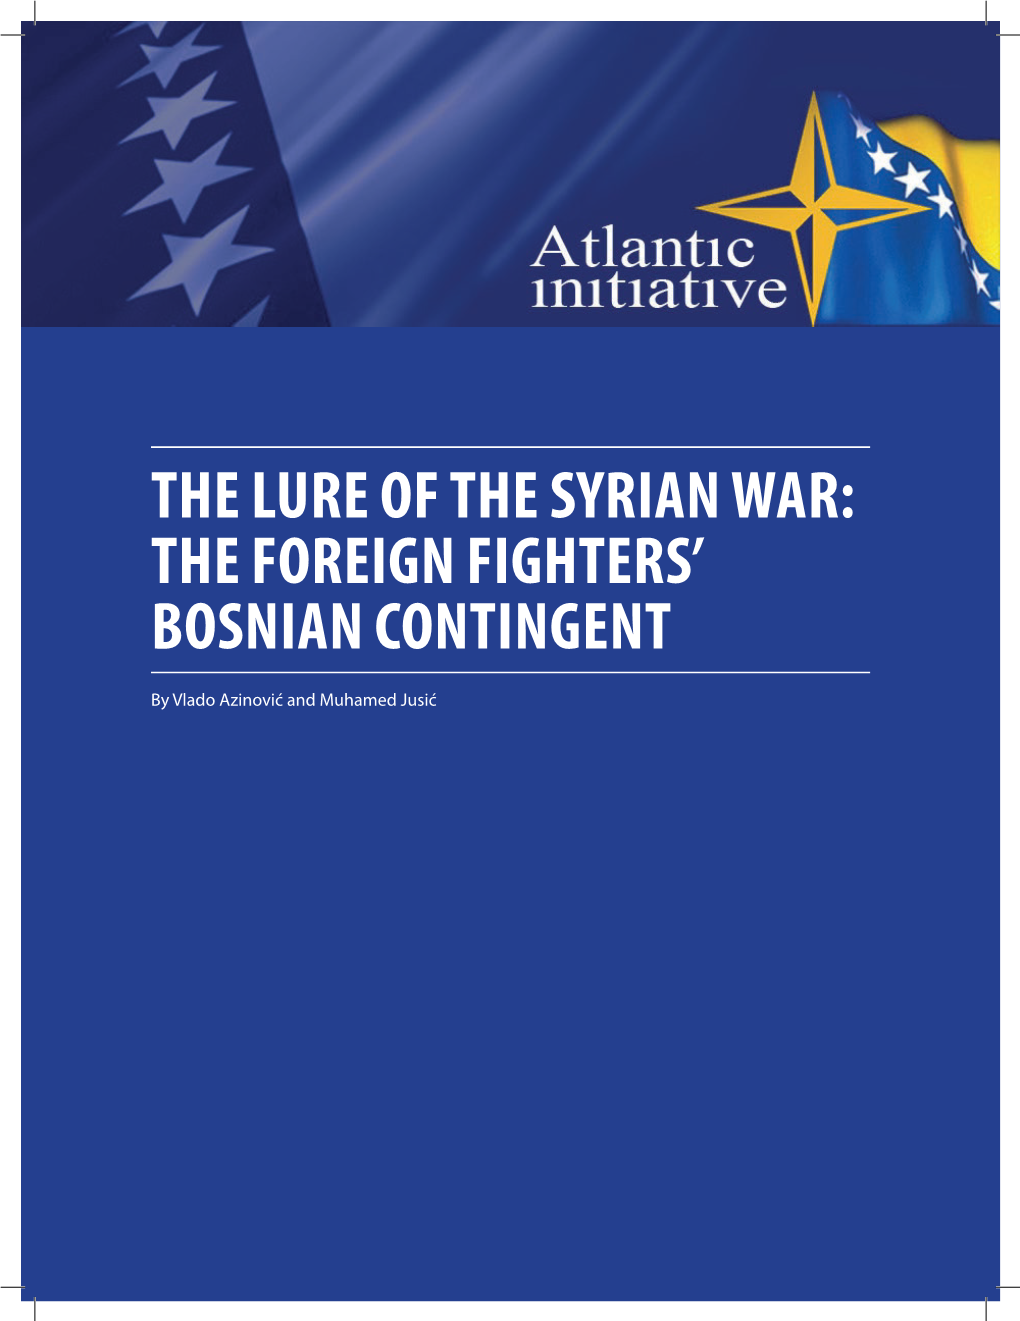 The Lure of the Syrian War: the Foreign Fighters’ Bosnian Contingent